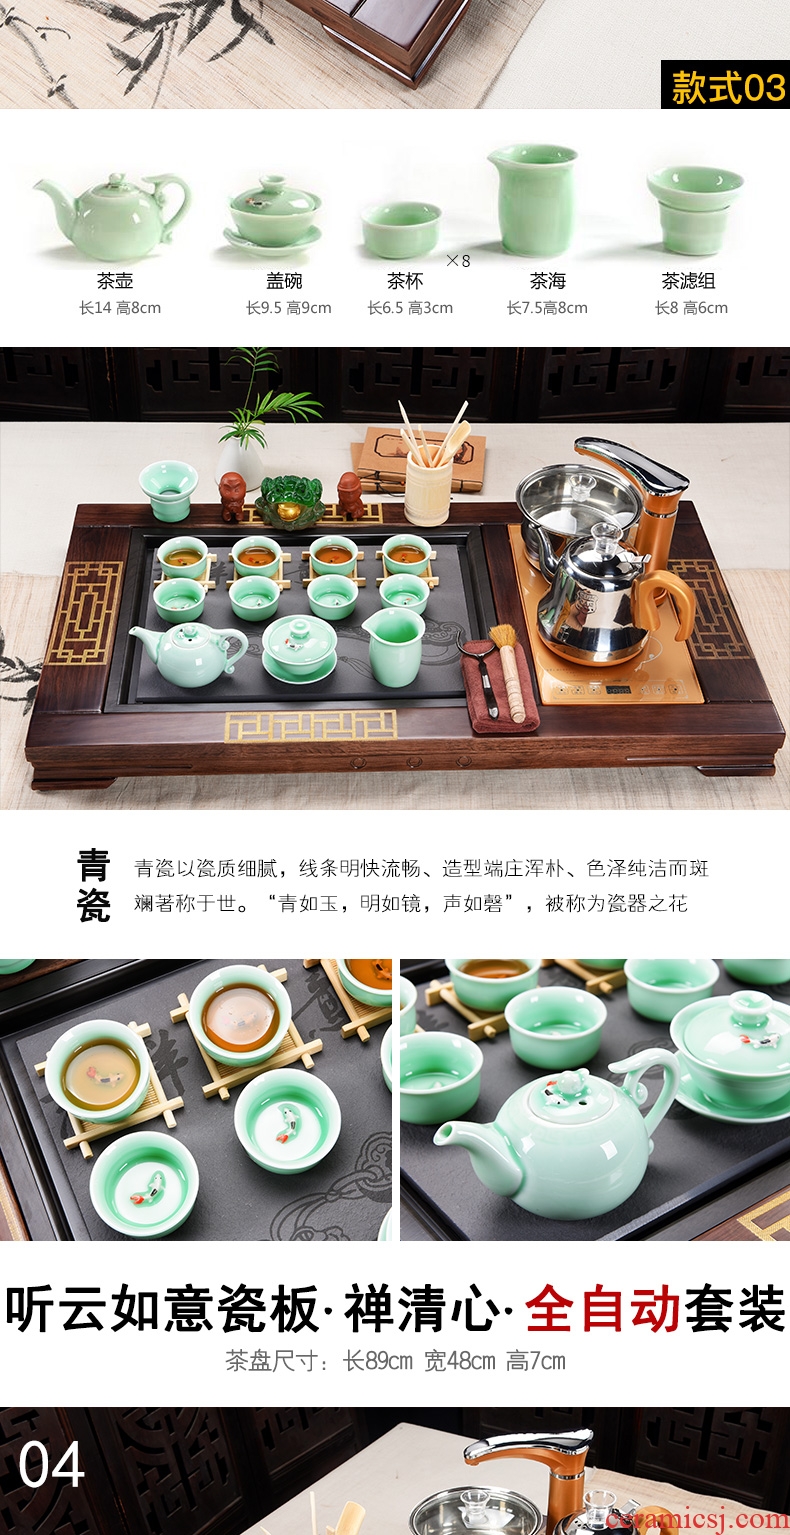 Beauty cabinet home four unity of the sitting room of a complete set of ceramic tea set automatic kung fu tea tea table solid wood tea tray